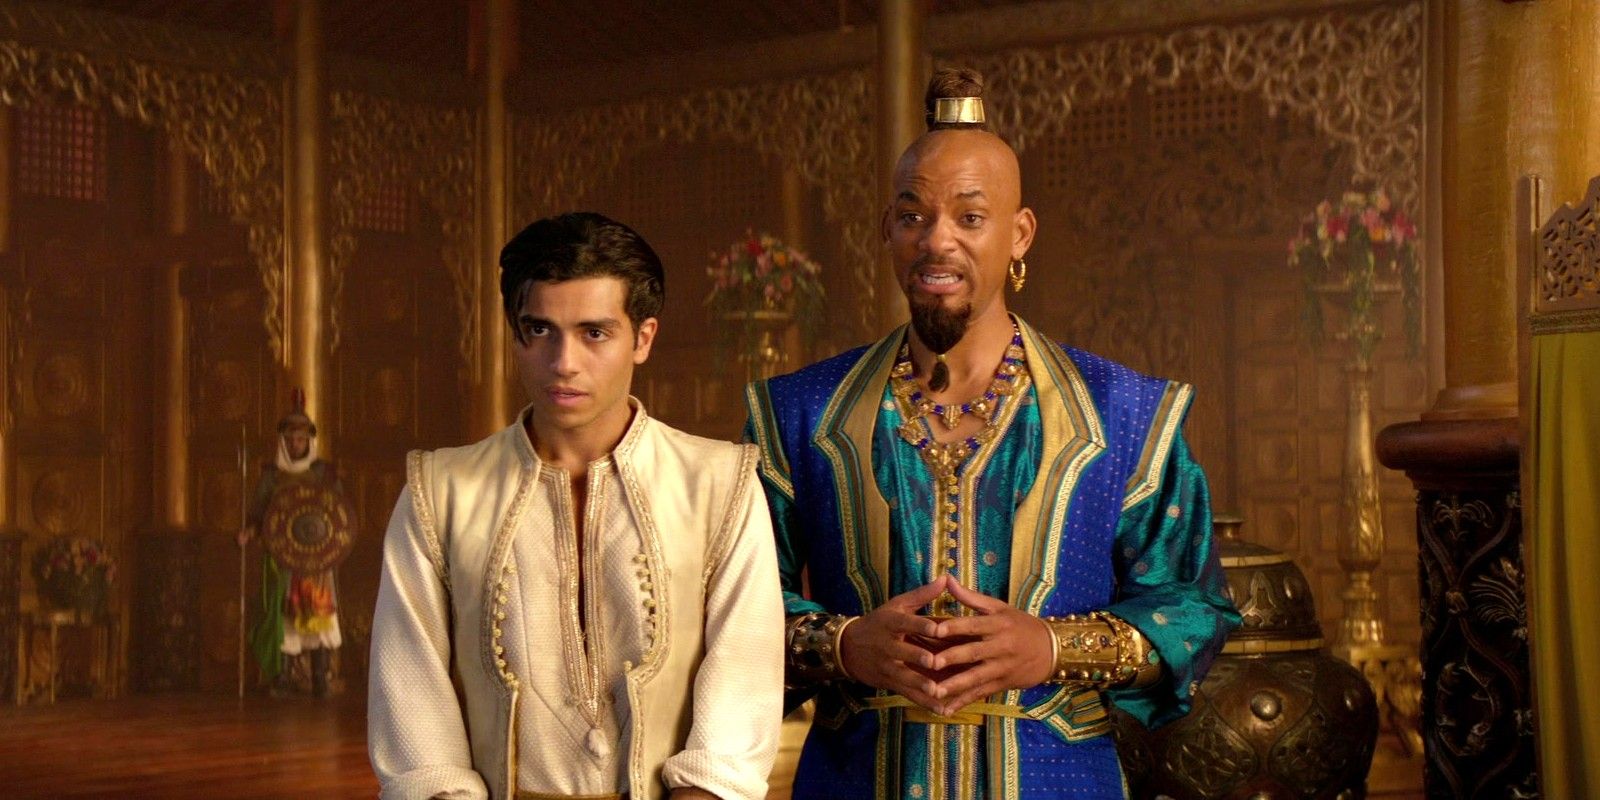 Aladdin 2 Update Given By Live-Action Disney Movie Director